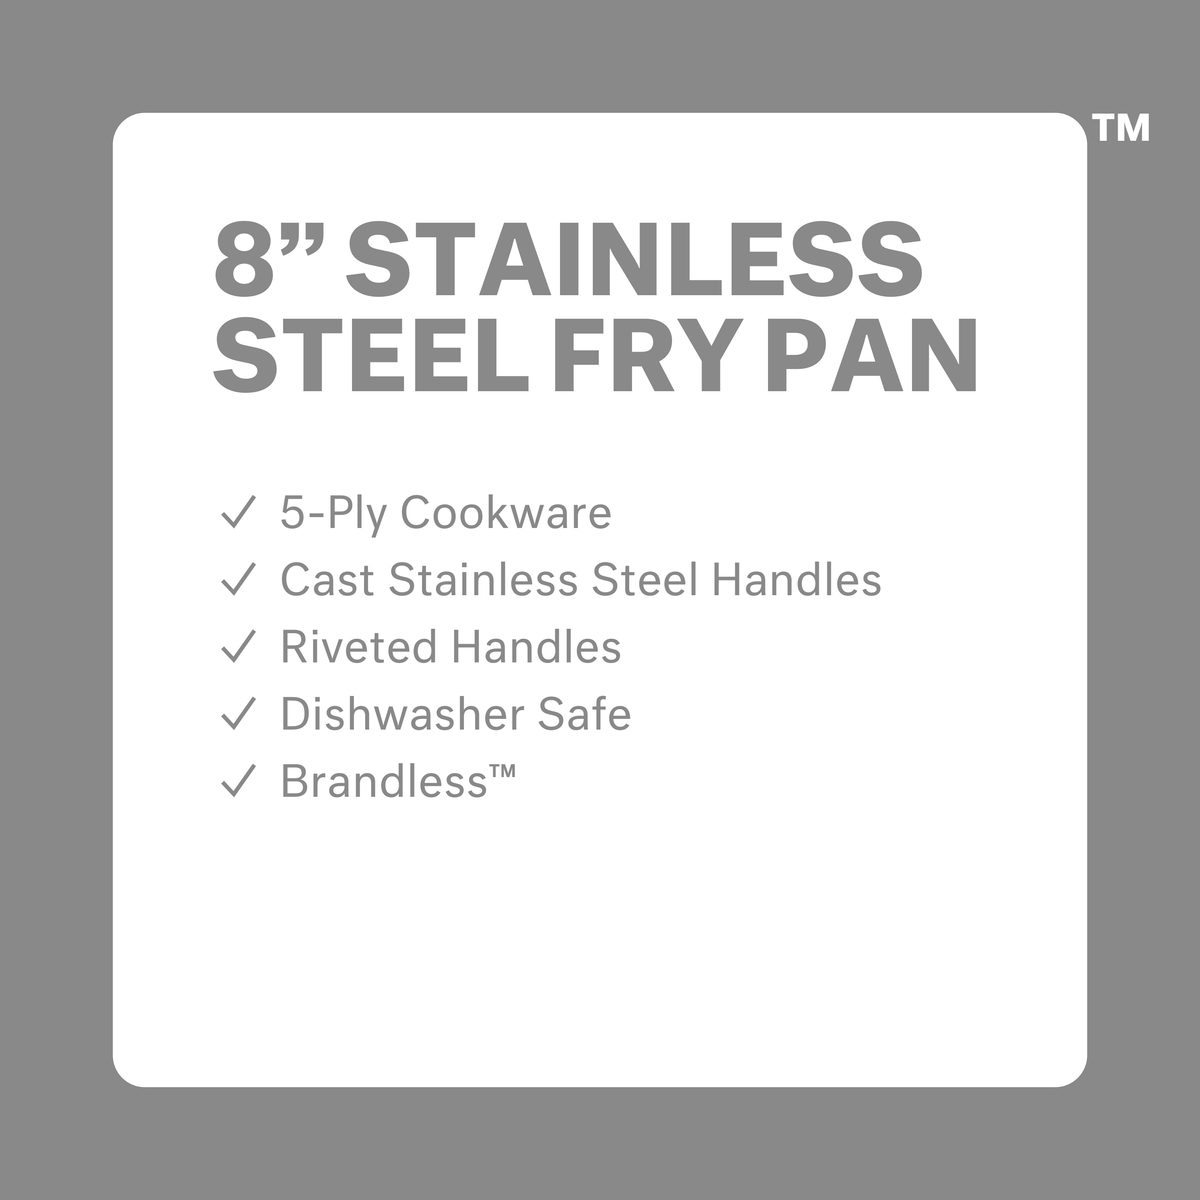 8 inch stainless steel fry pan. 5-ply cookware. Cast stainless steel handles. Riveted Handles. Dishwasher safe. Brandless.